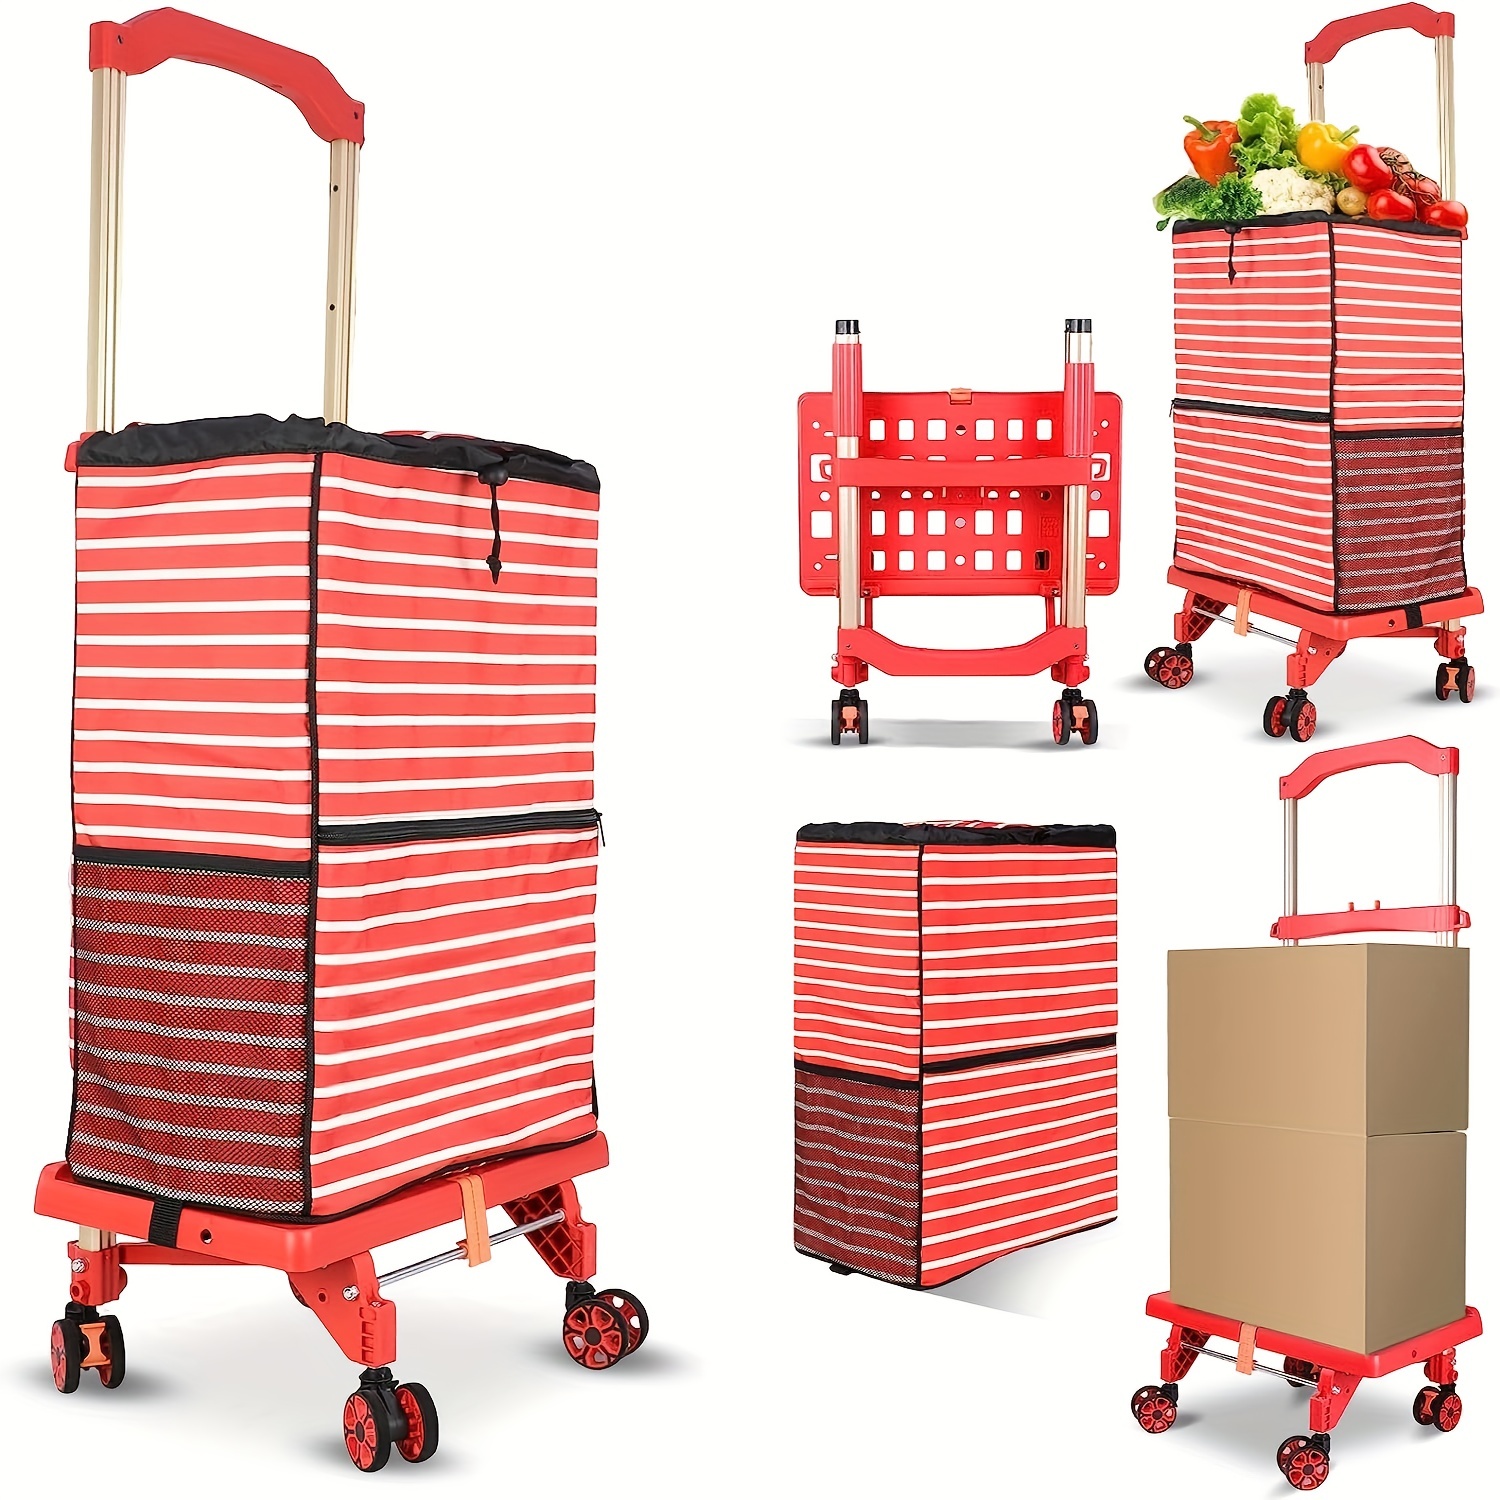 Sleek Foldable Trolley Cart, Portable & Compact for Home